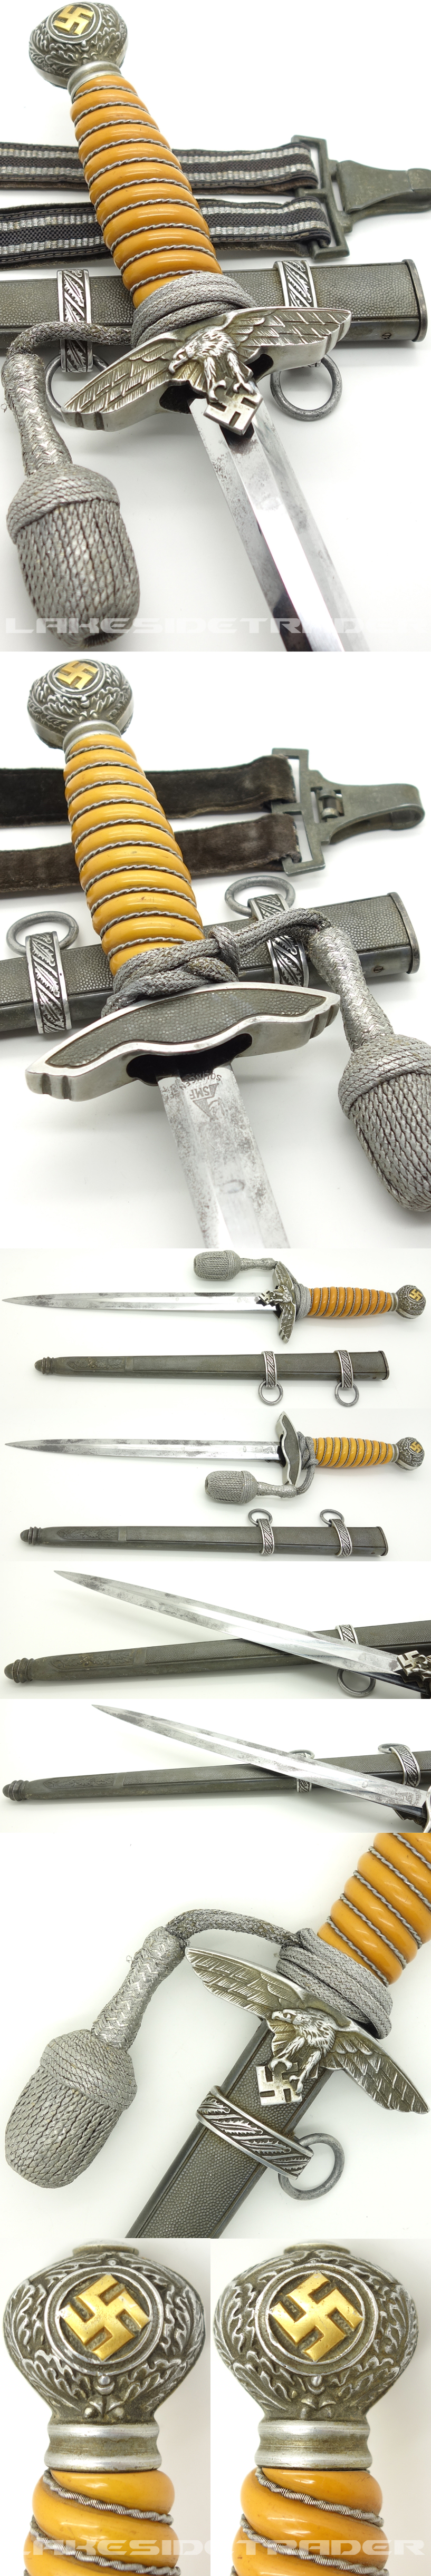 2nd Model Luftwaffe Dagger by SMF w Accouterments